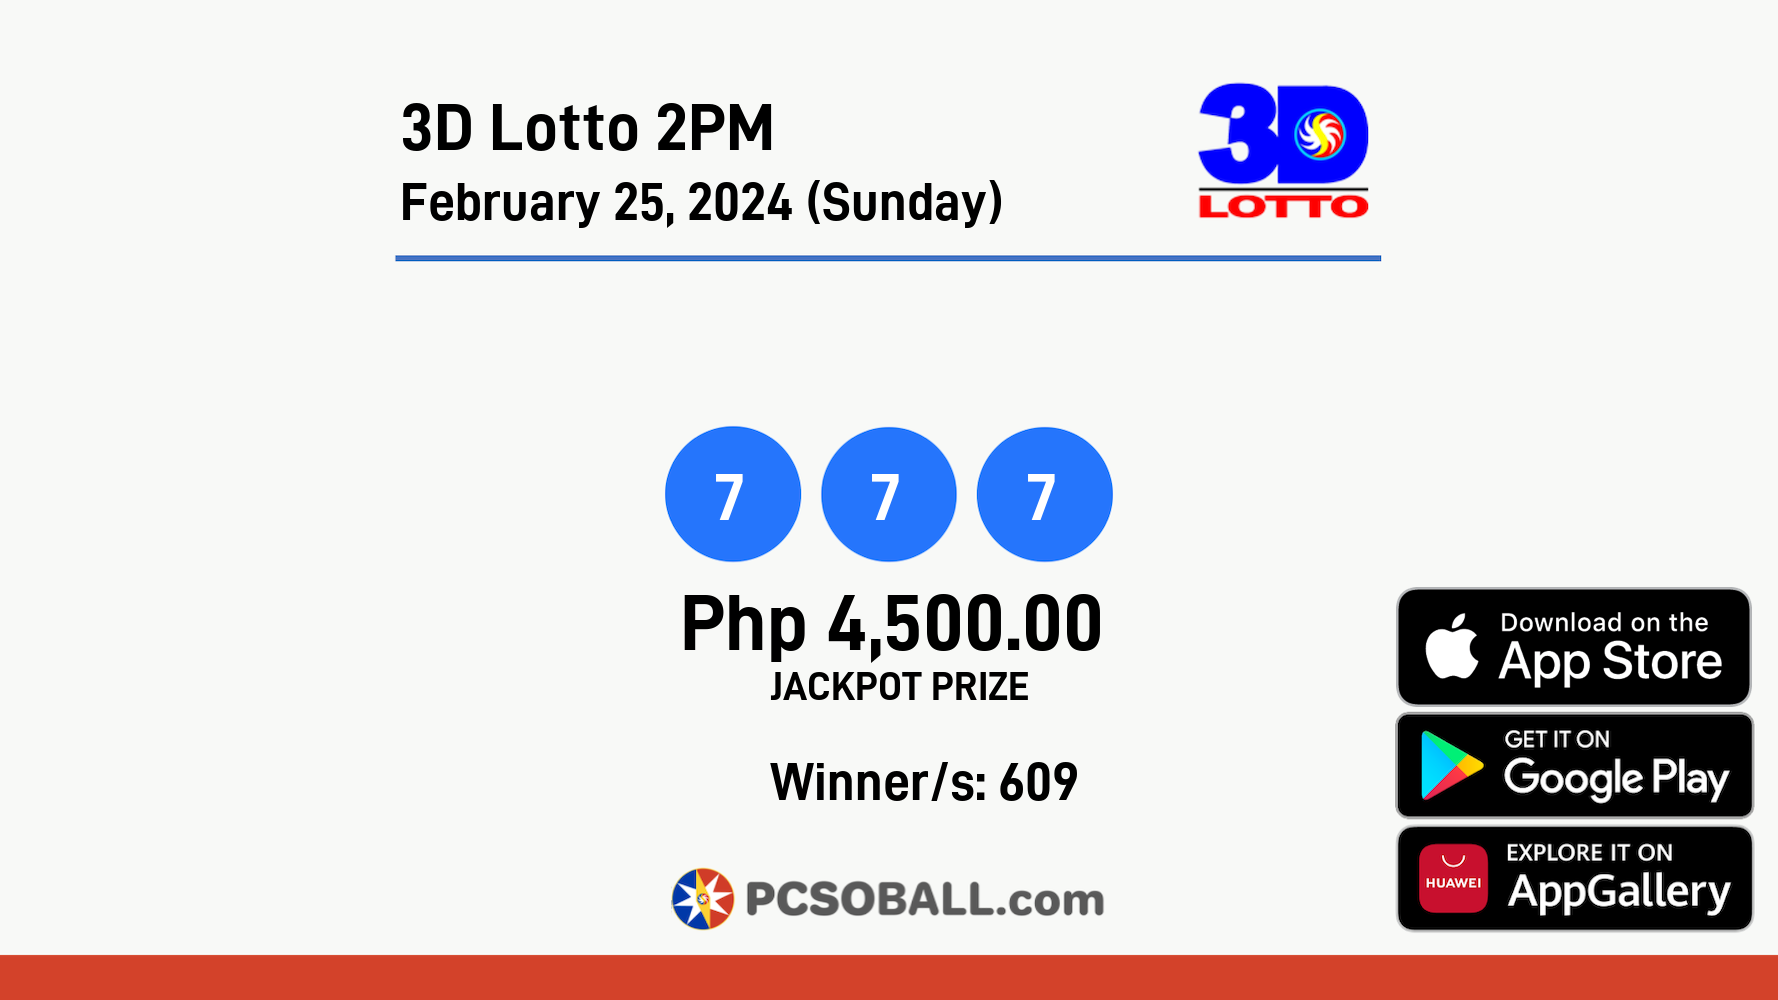 3D Lotto 2PM February 25, 2024 (Sunday) Result